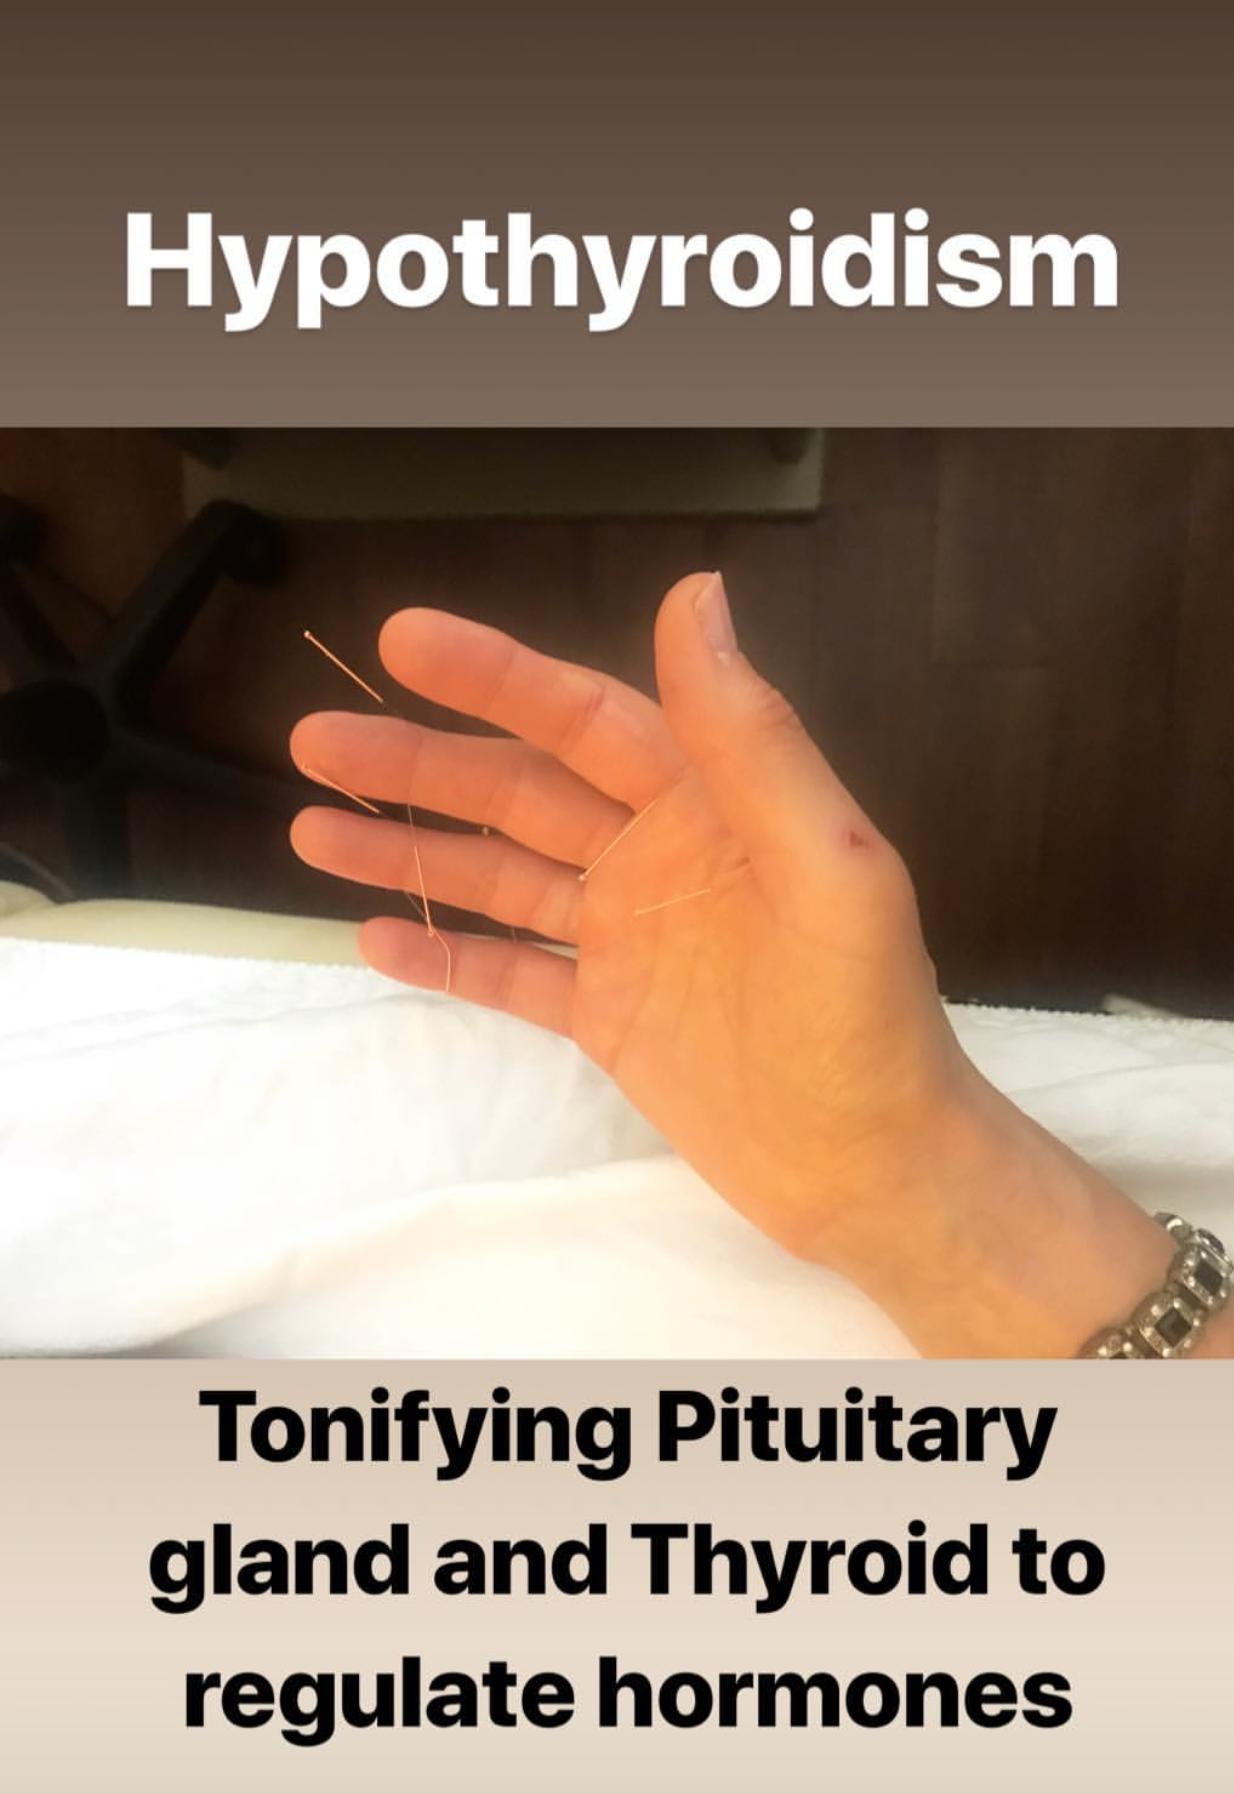  SuJok acupuncture in Vancouver used to treat hormonal issues and conditions. Patient receives treatment for hypothyroidism and focuses on toning the pituitary gland and thyroid to regulate and balance hormones.  